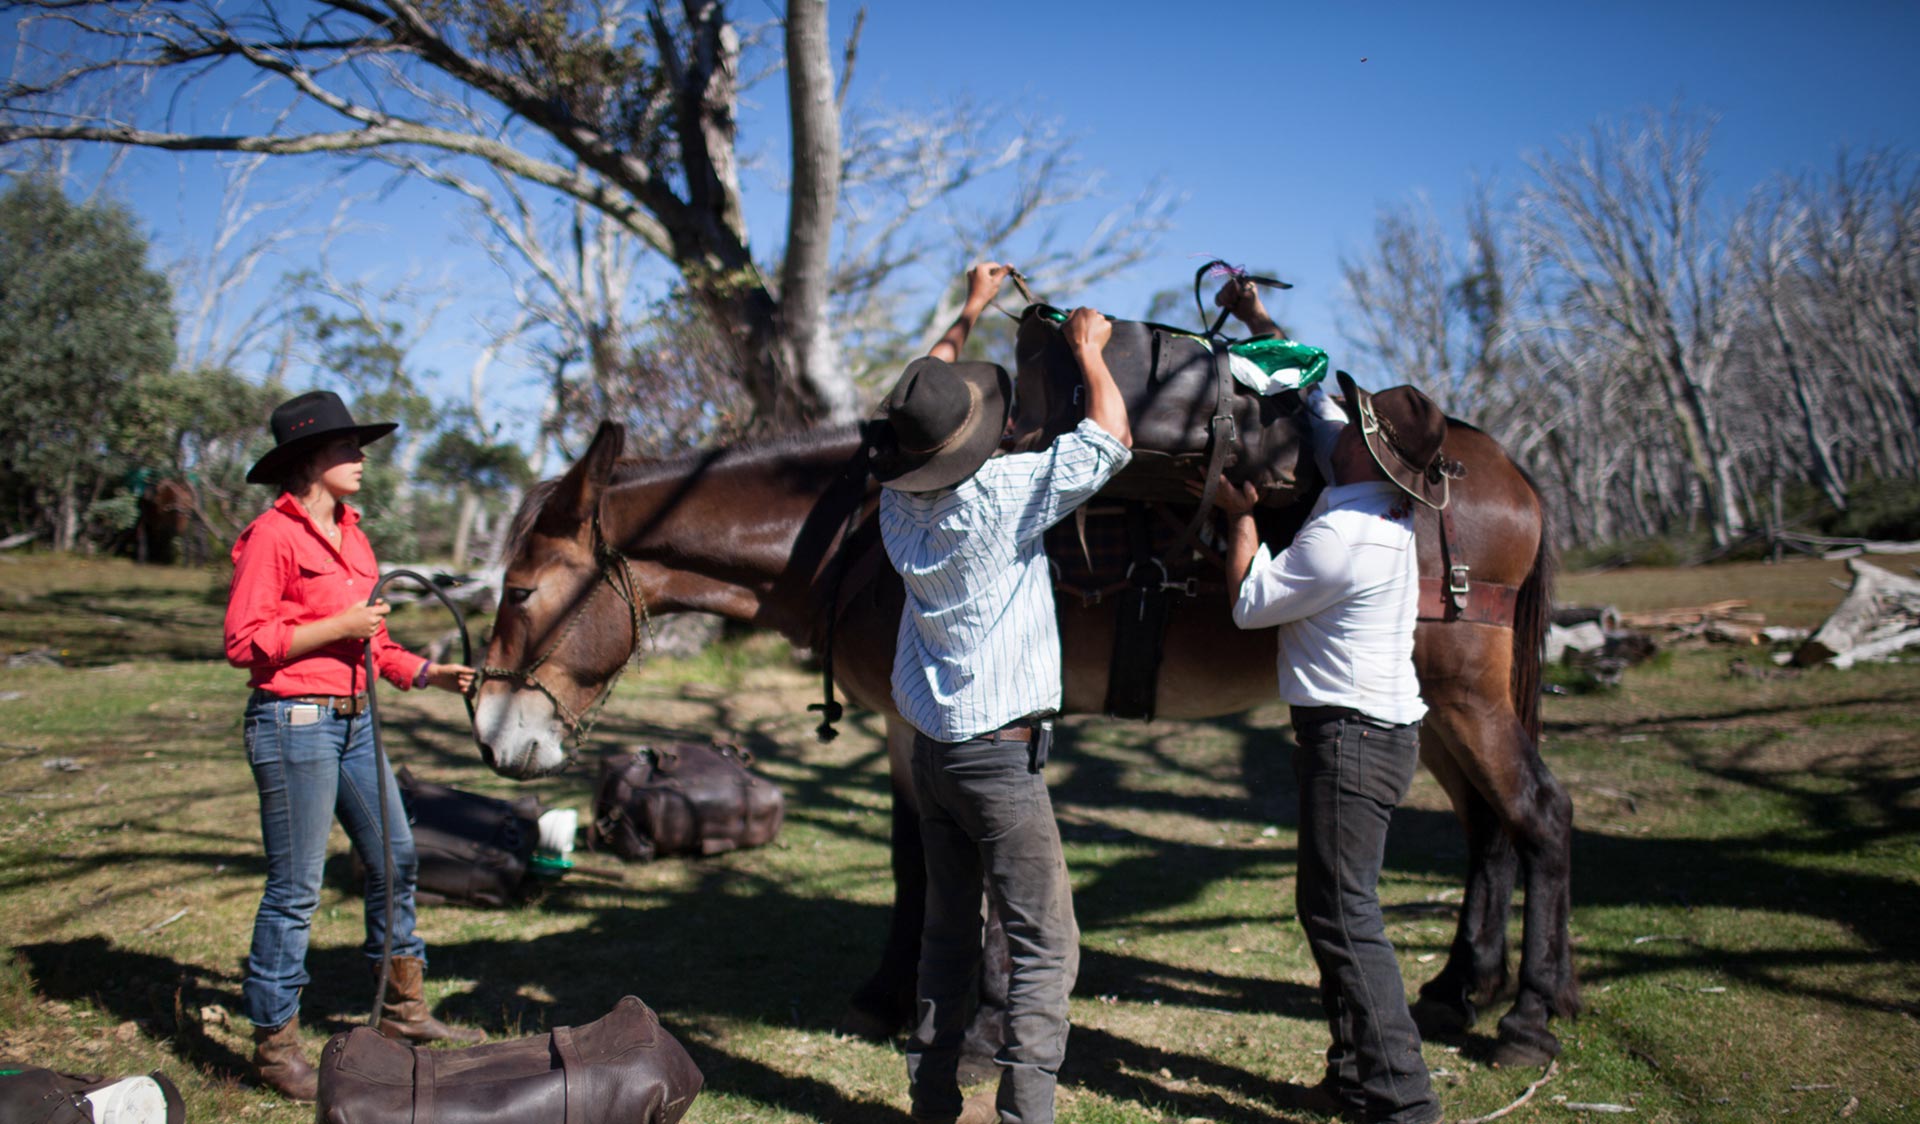 Three horseriders saddle-up a pack horse before the day's riding.